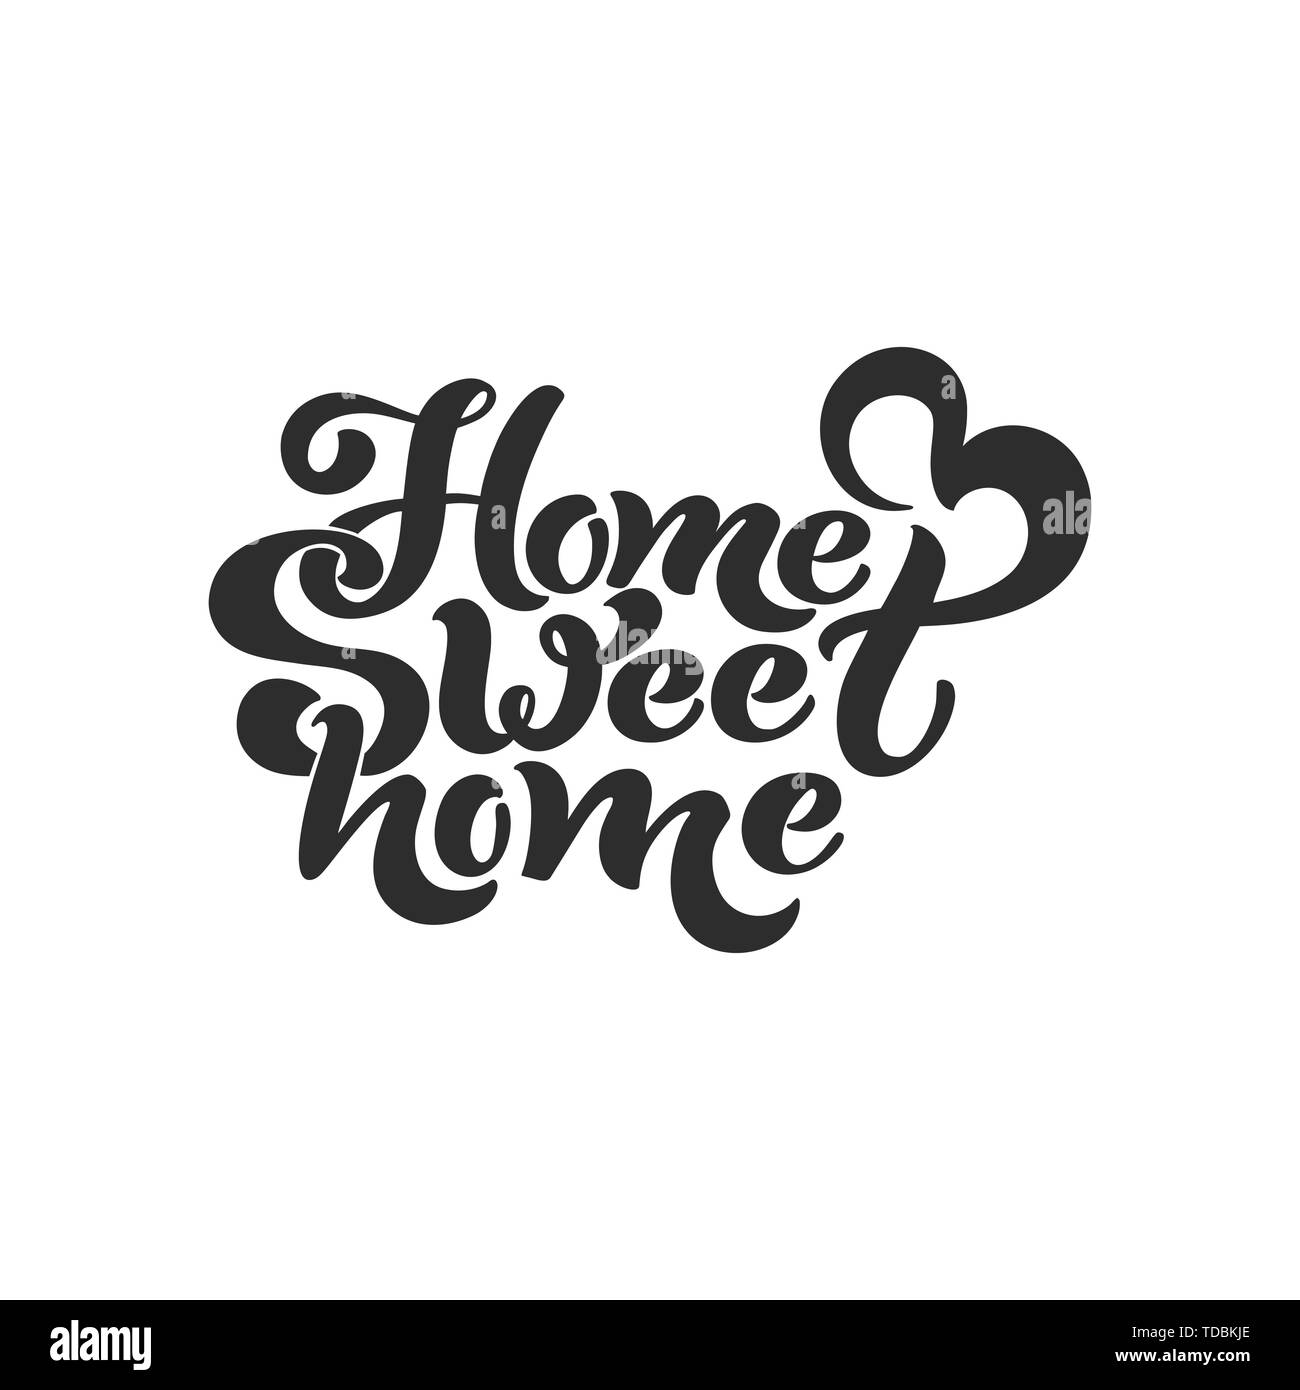 Home sweet home. Typographic vector design for greeting card, invitation card, background, lettering composition. Handwritten modern brush lettering. Stock Vector